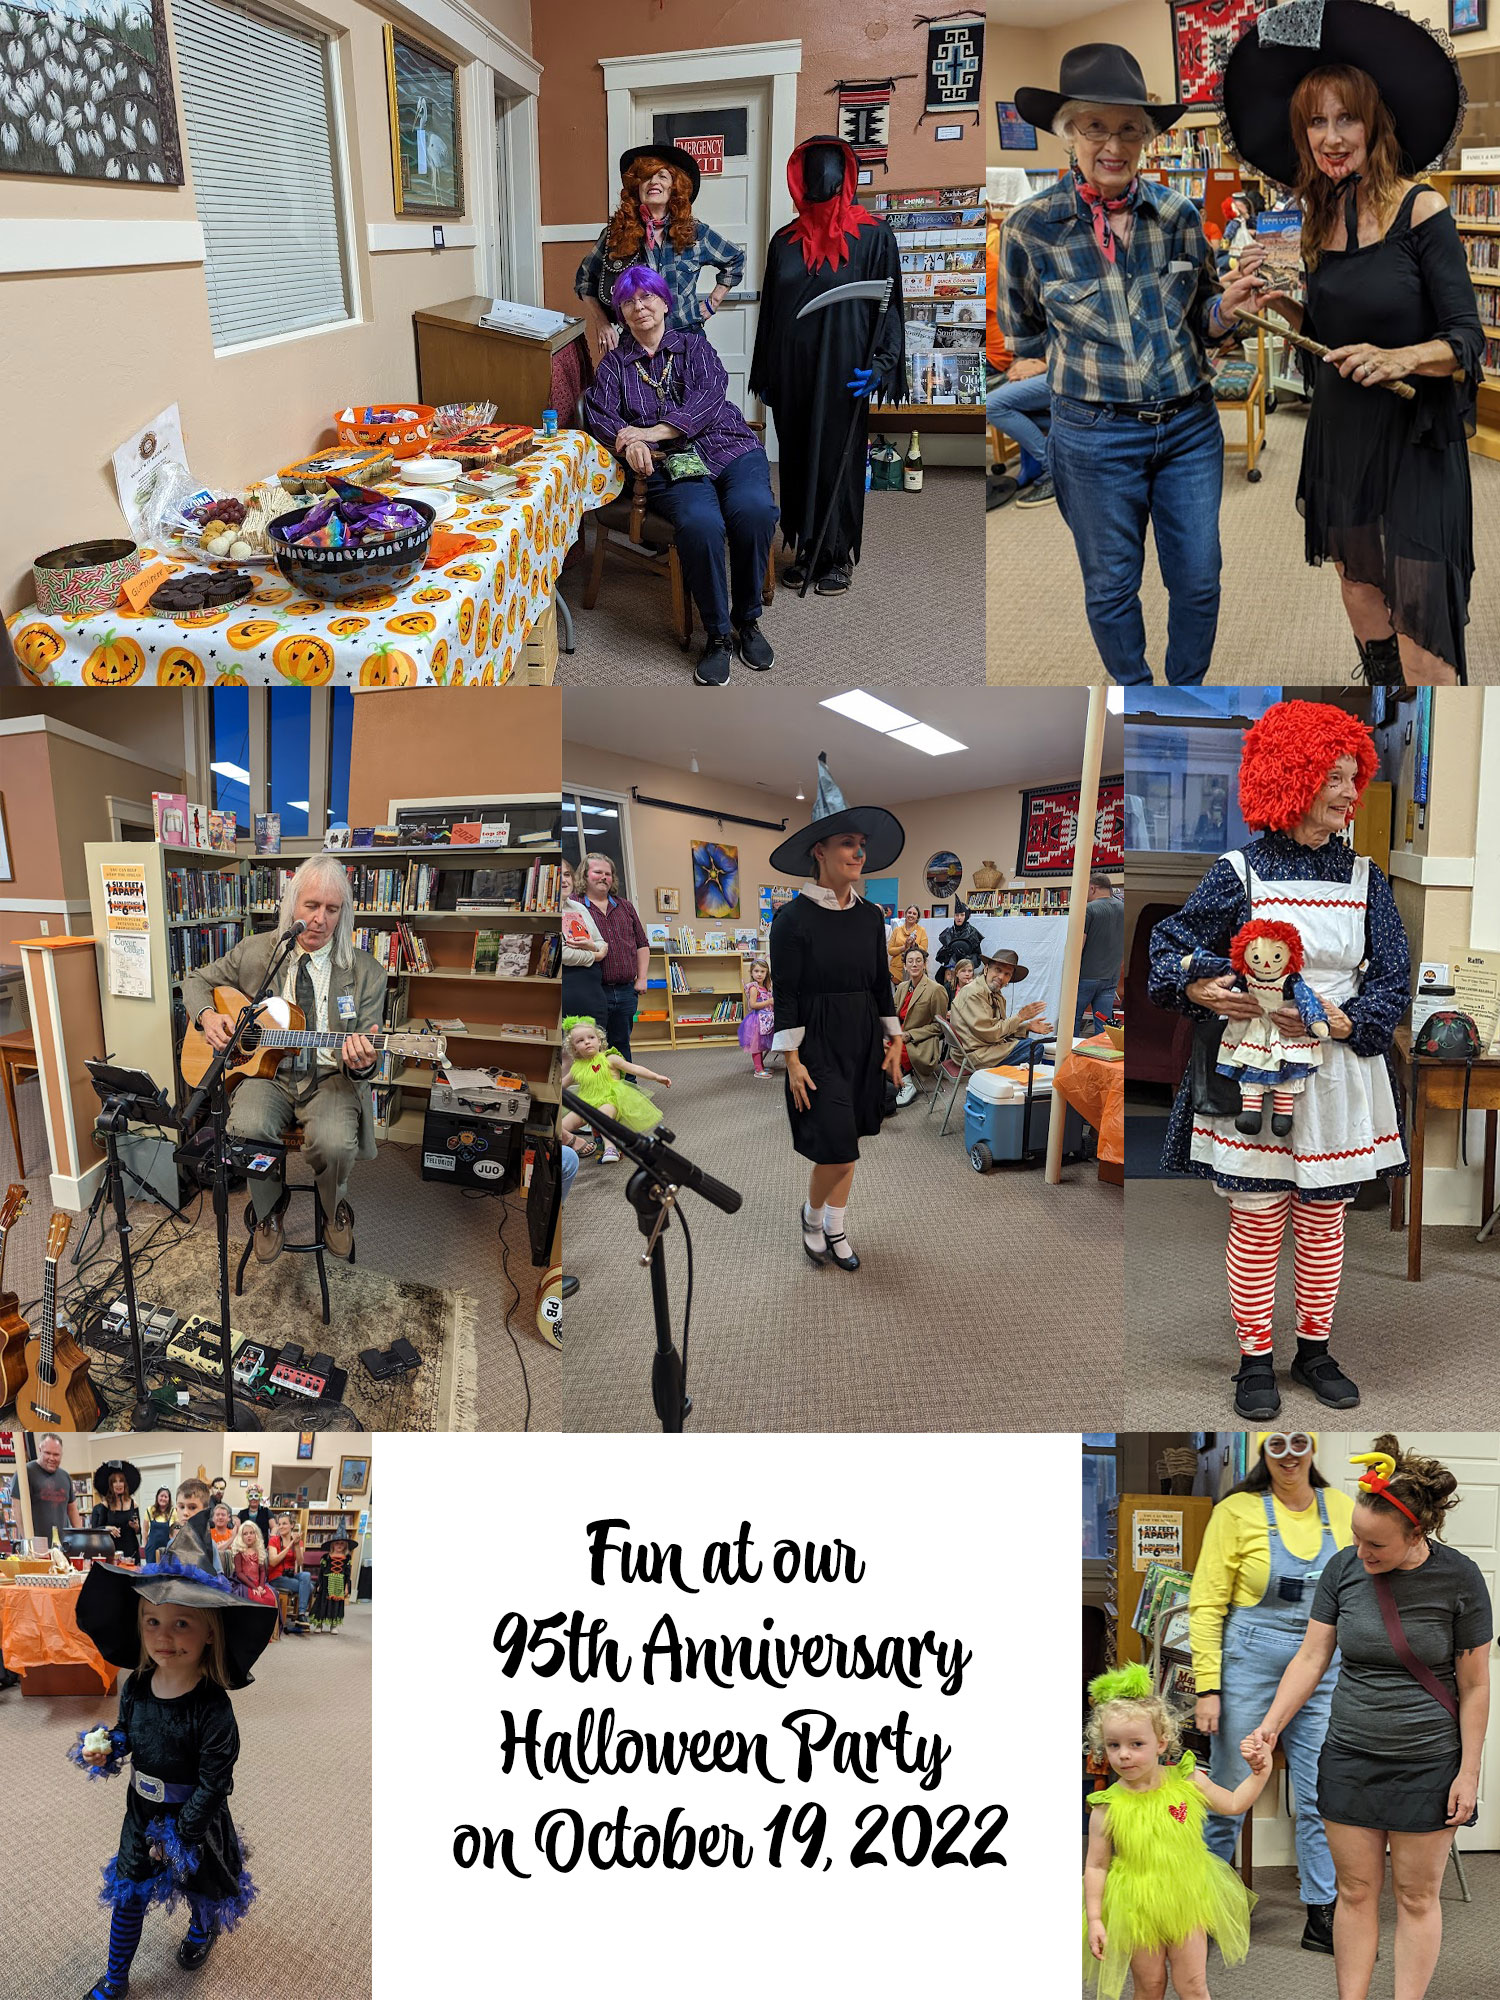 Fun at our 95th Anniversary-Halloween Party on October 19, 2022